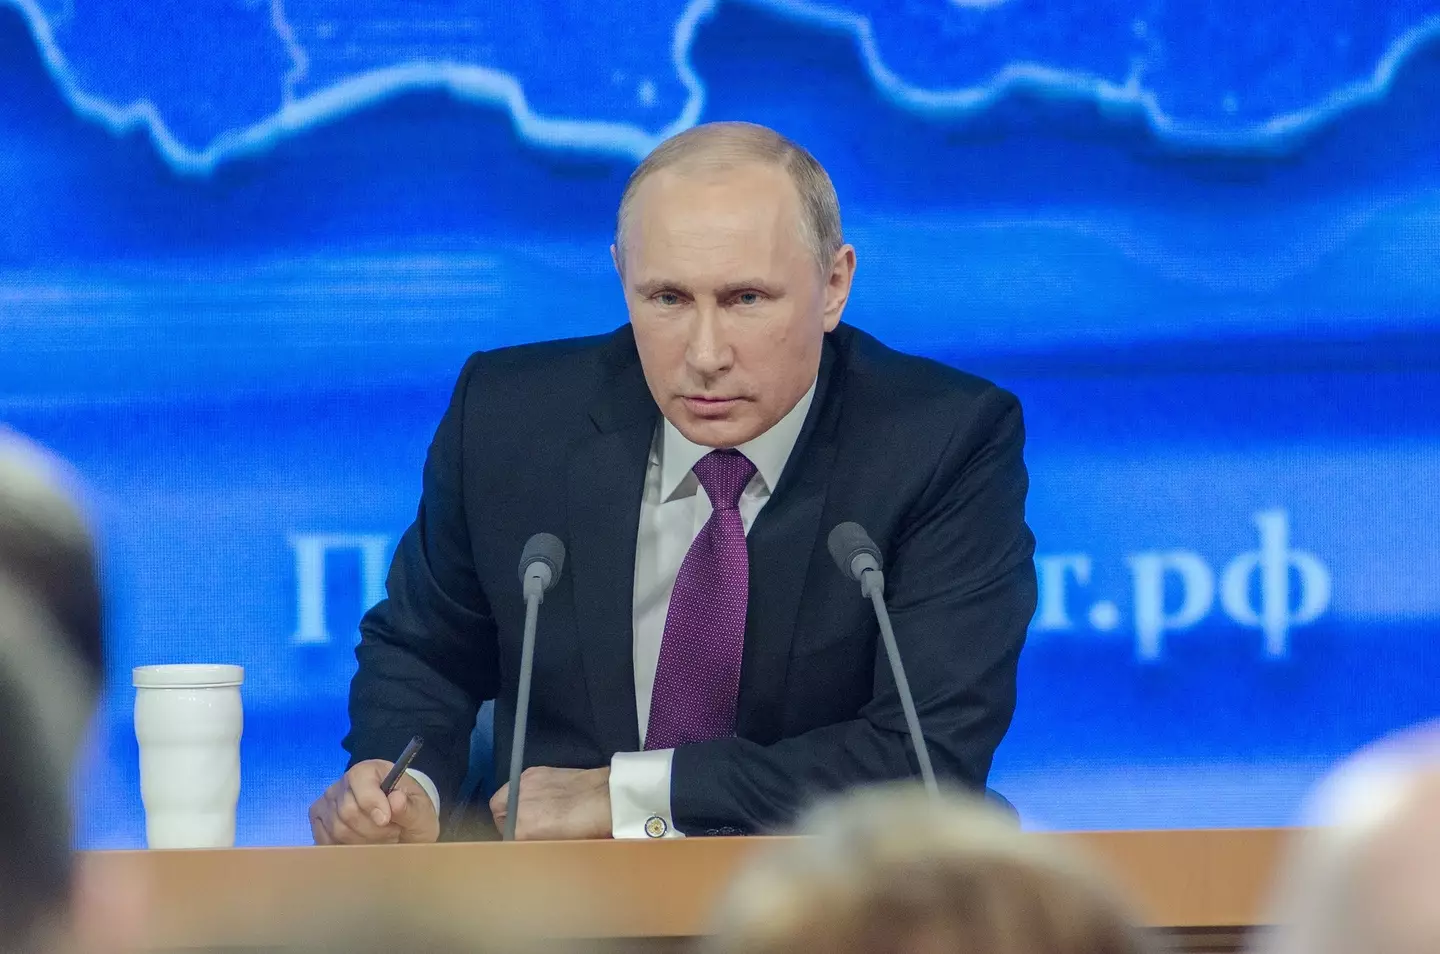 Putin was not at the Kremlin at the time of the alleged attack.